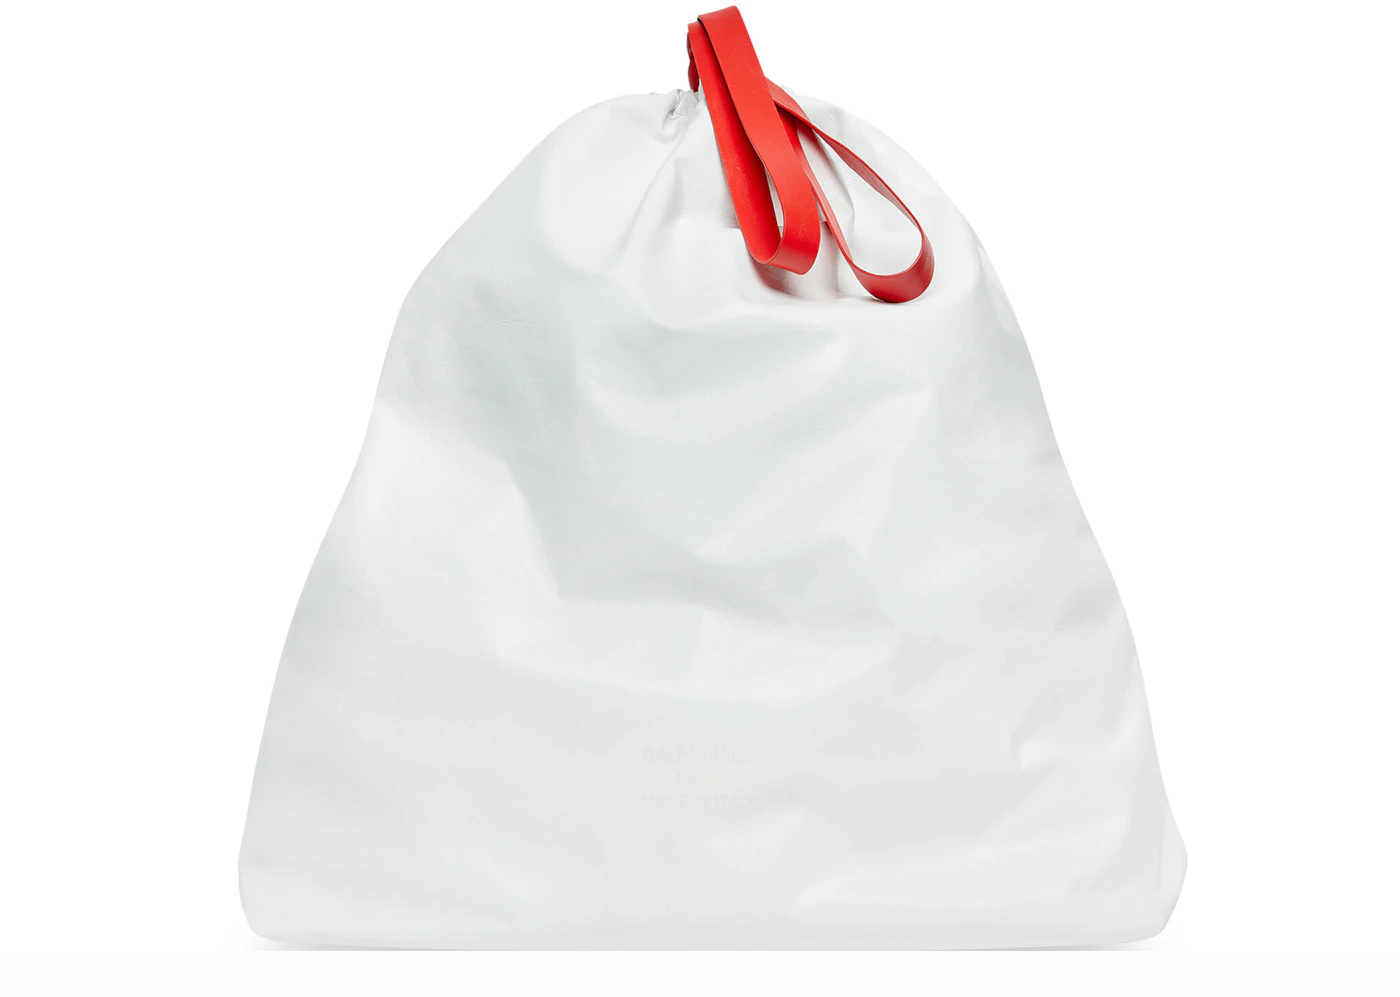 Balenciaga Trash Bag Large Pouch White/Red in Calfskin Leather - US